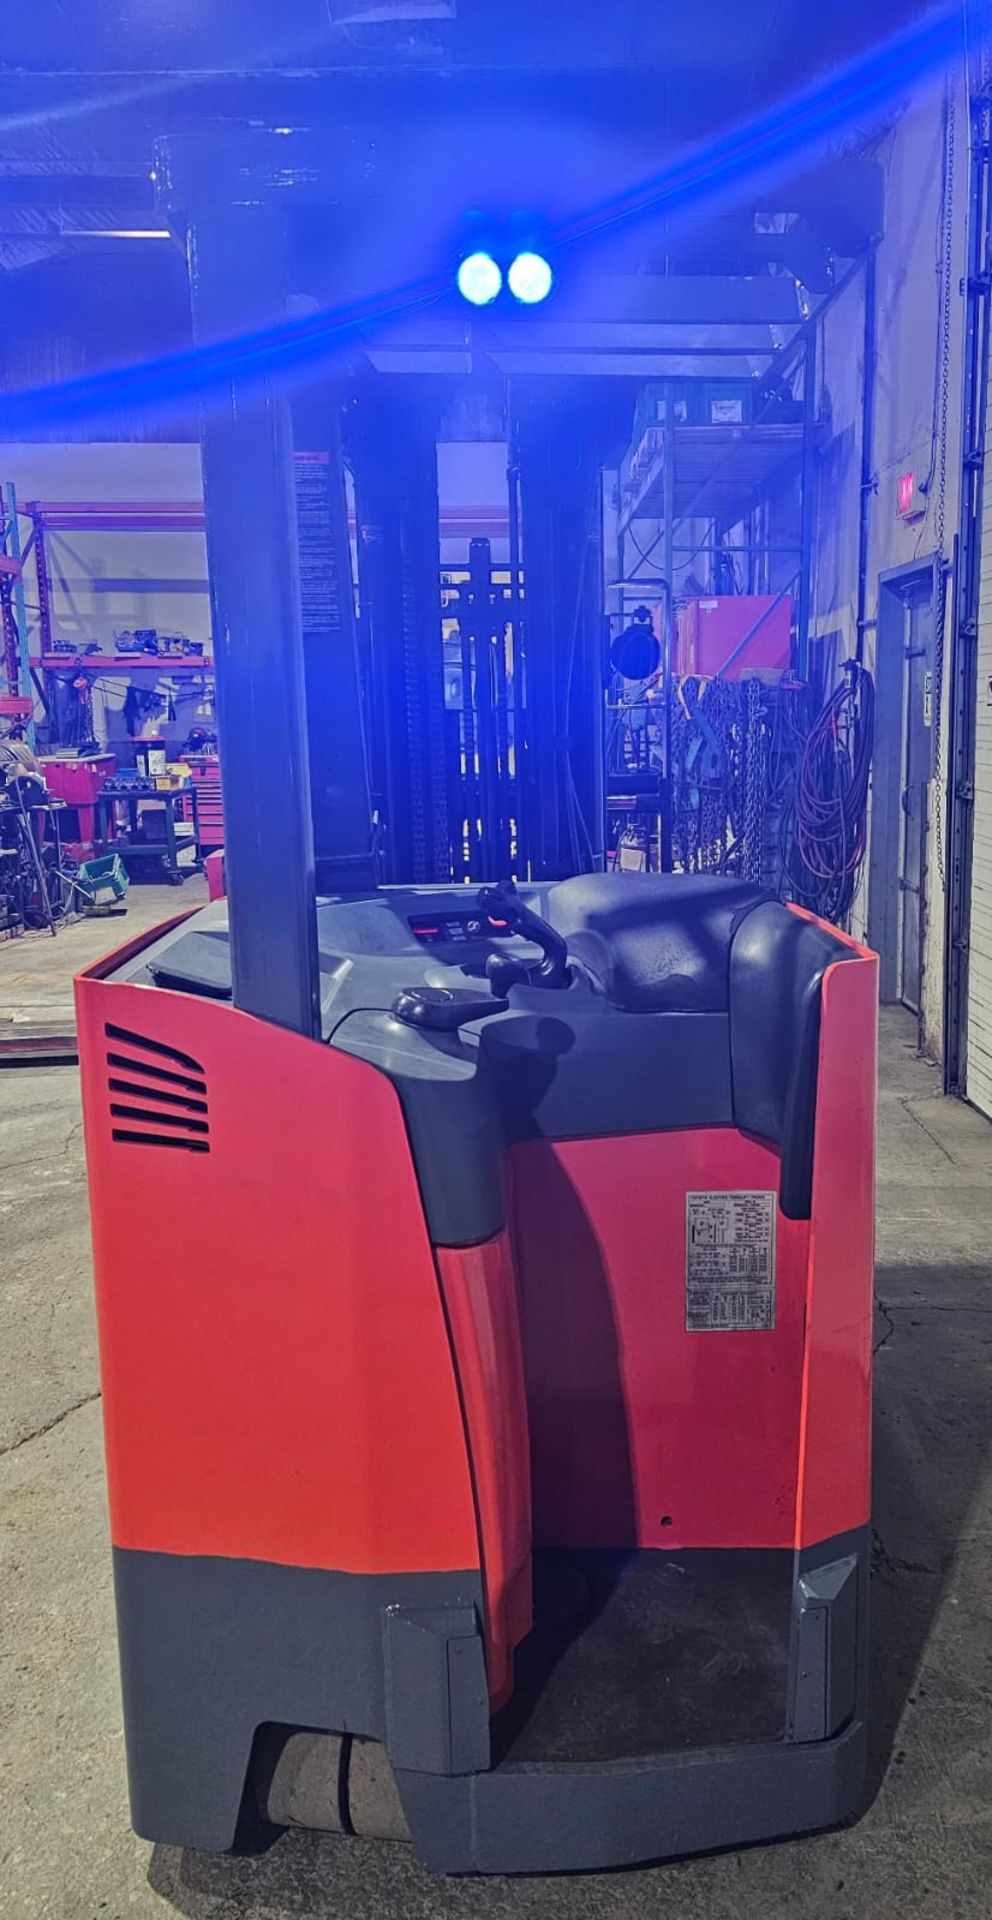 2017 Toyota 4,000lbsCapacity Forklift Electric 36V 15923 with sideshift & 4-STAGE MAST 276" load - Image 3 of 8